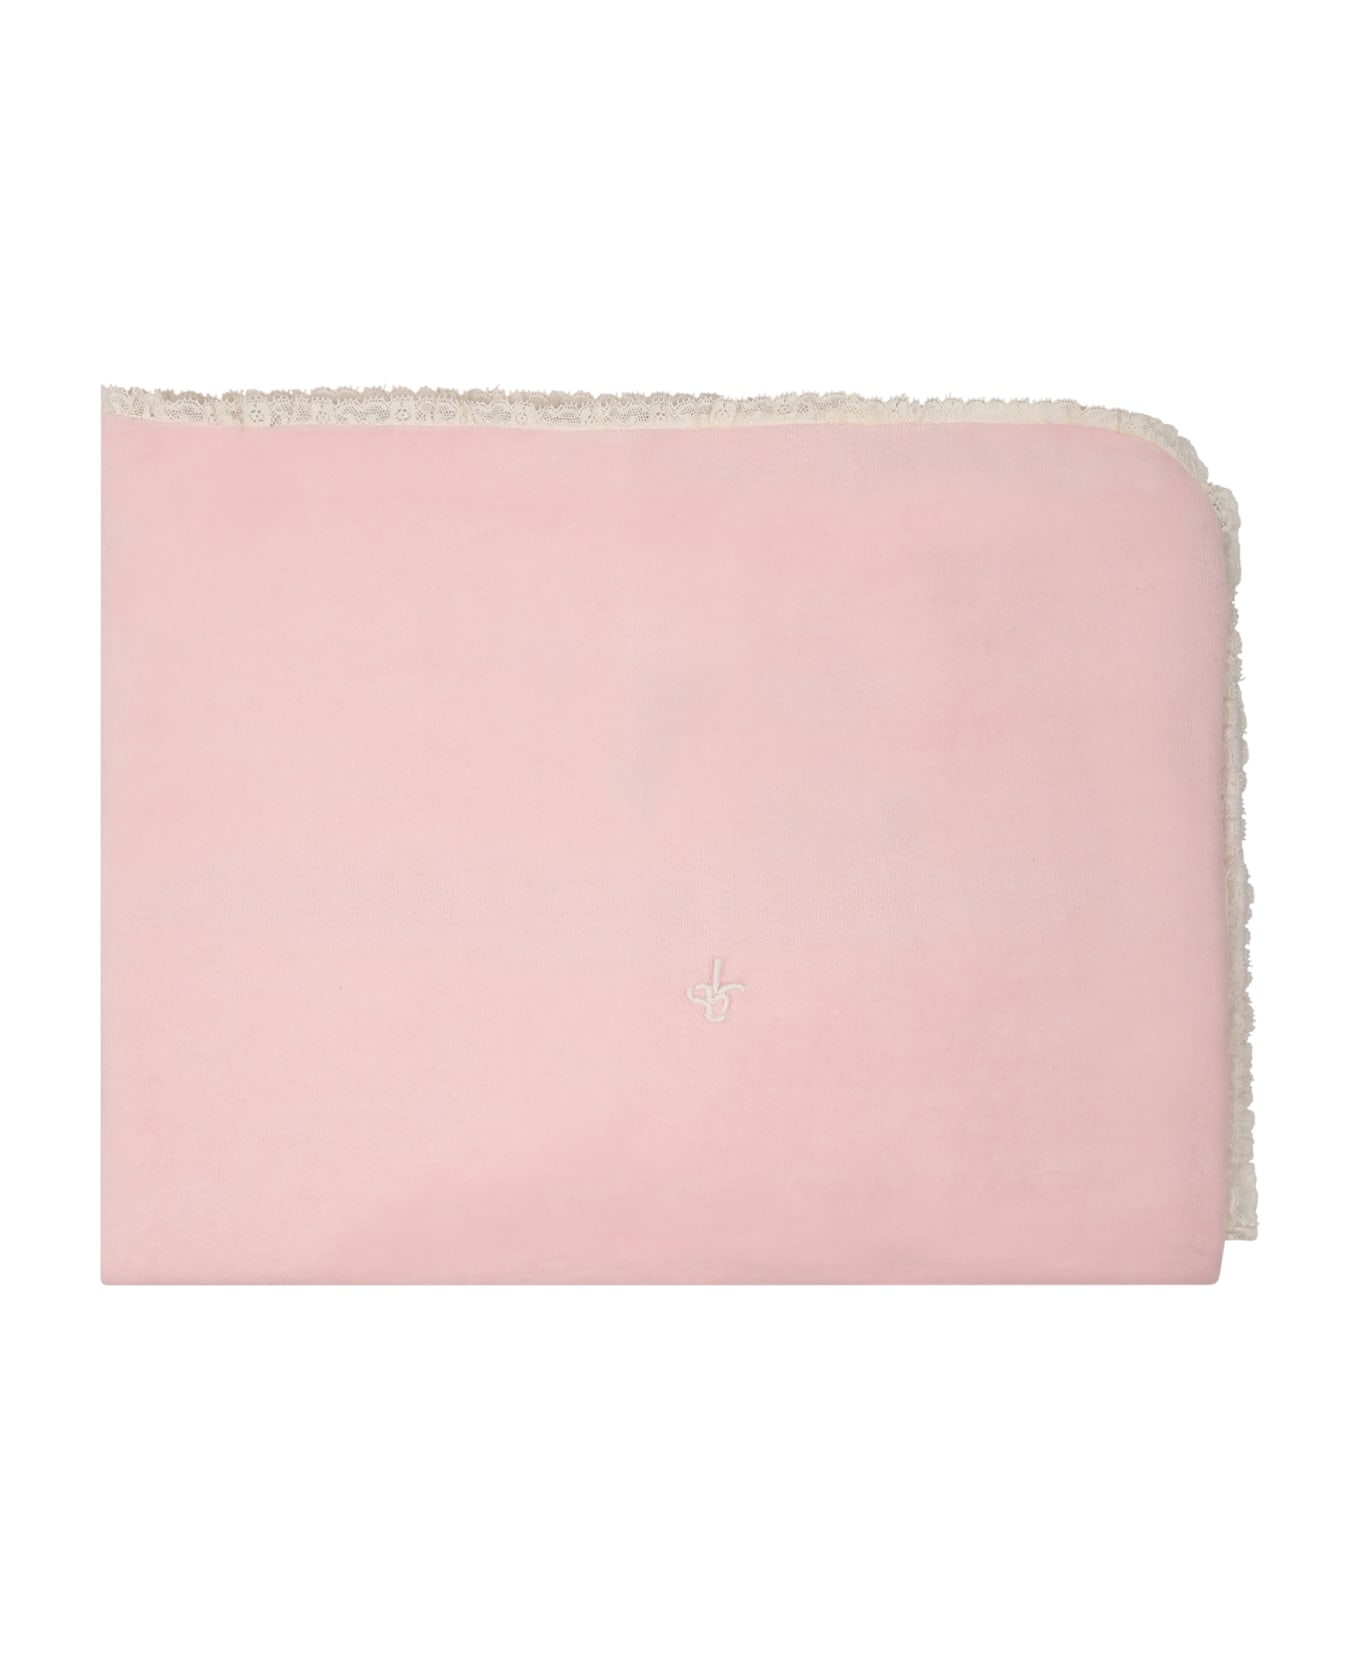 La stupenderia Pink Blanket For Baby Girl With Bow - Pink アクセサリー＆ギフト